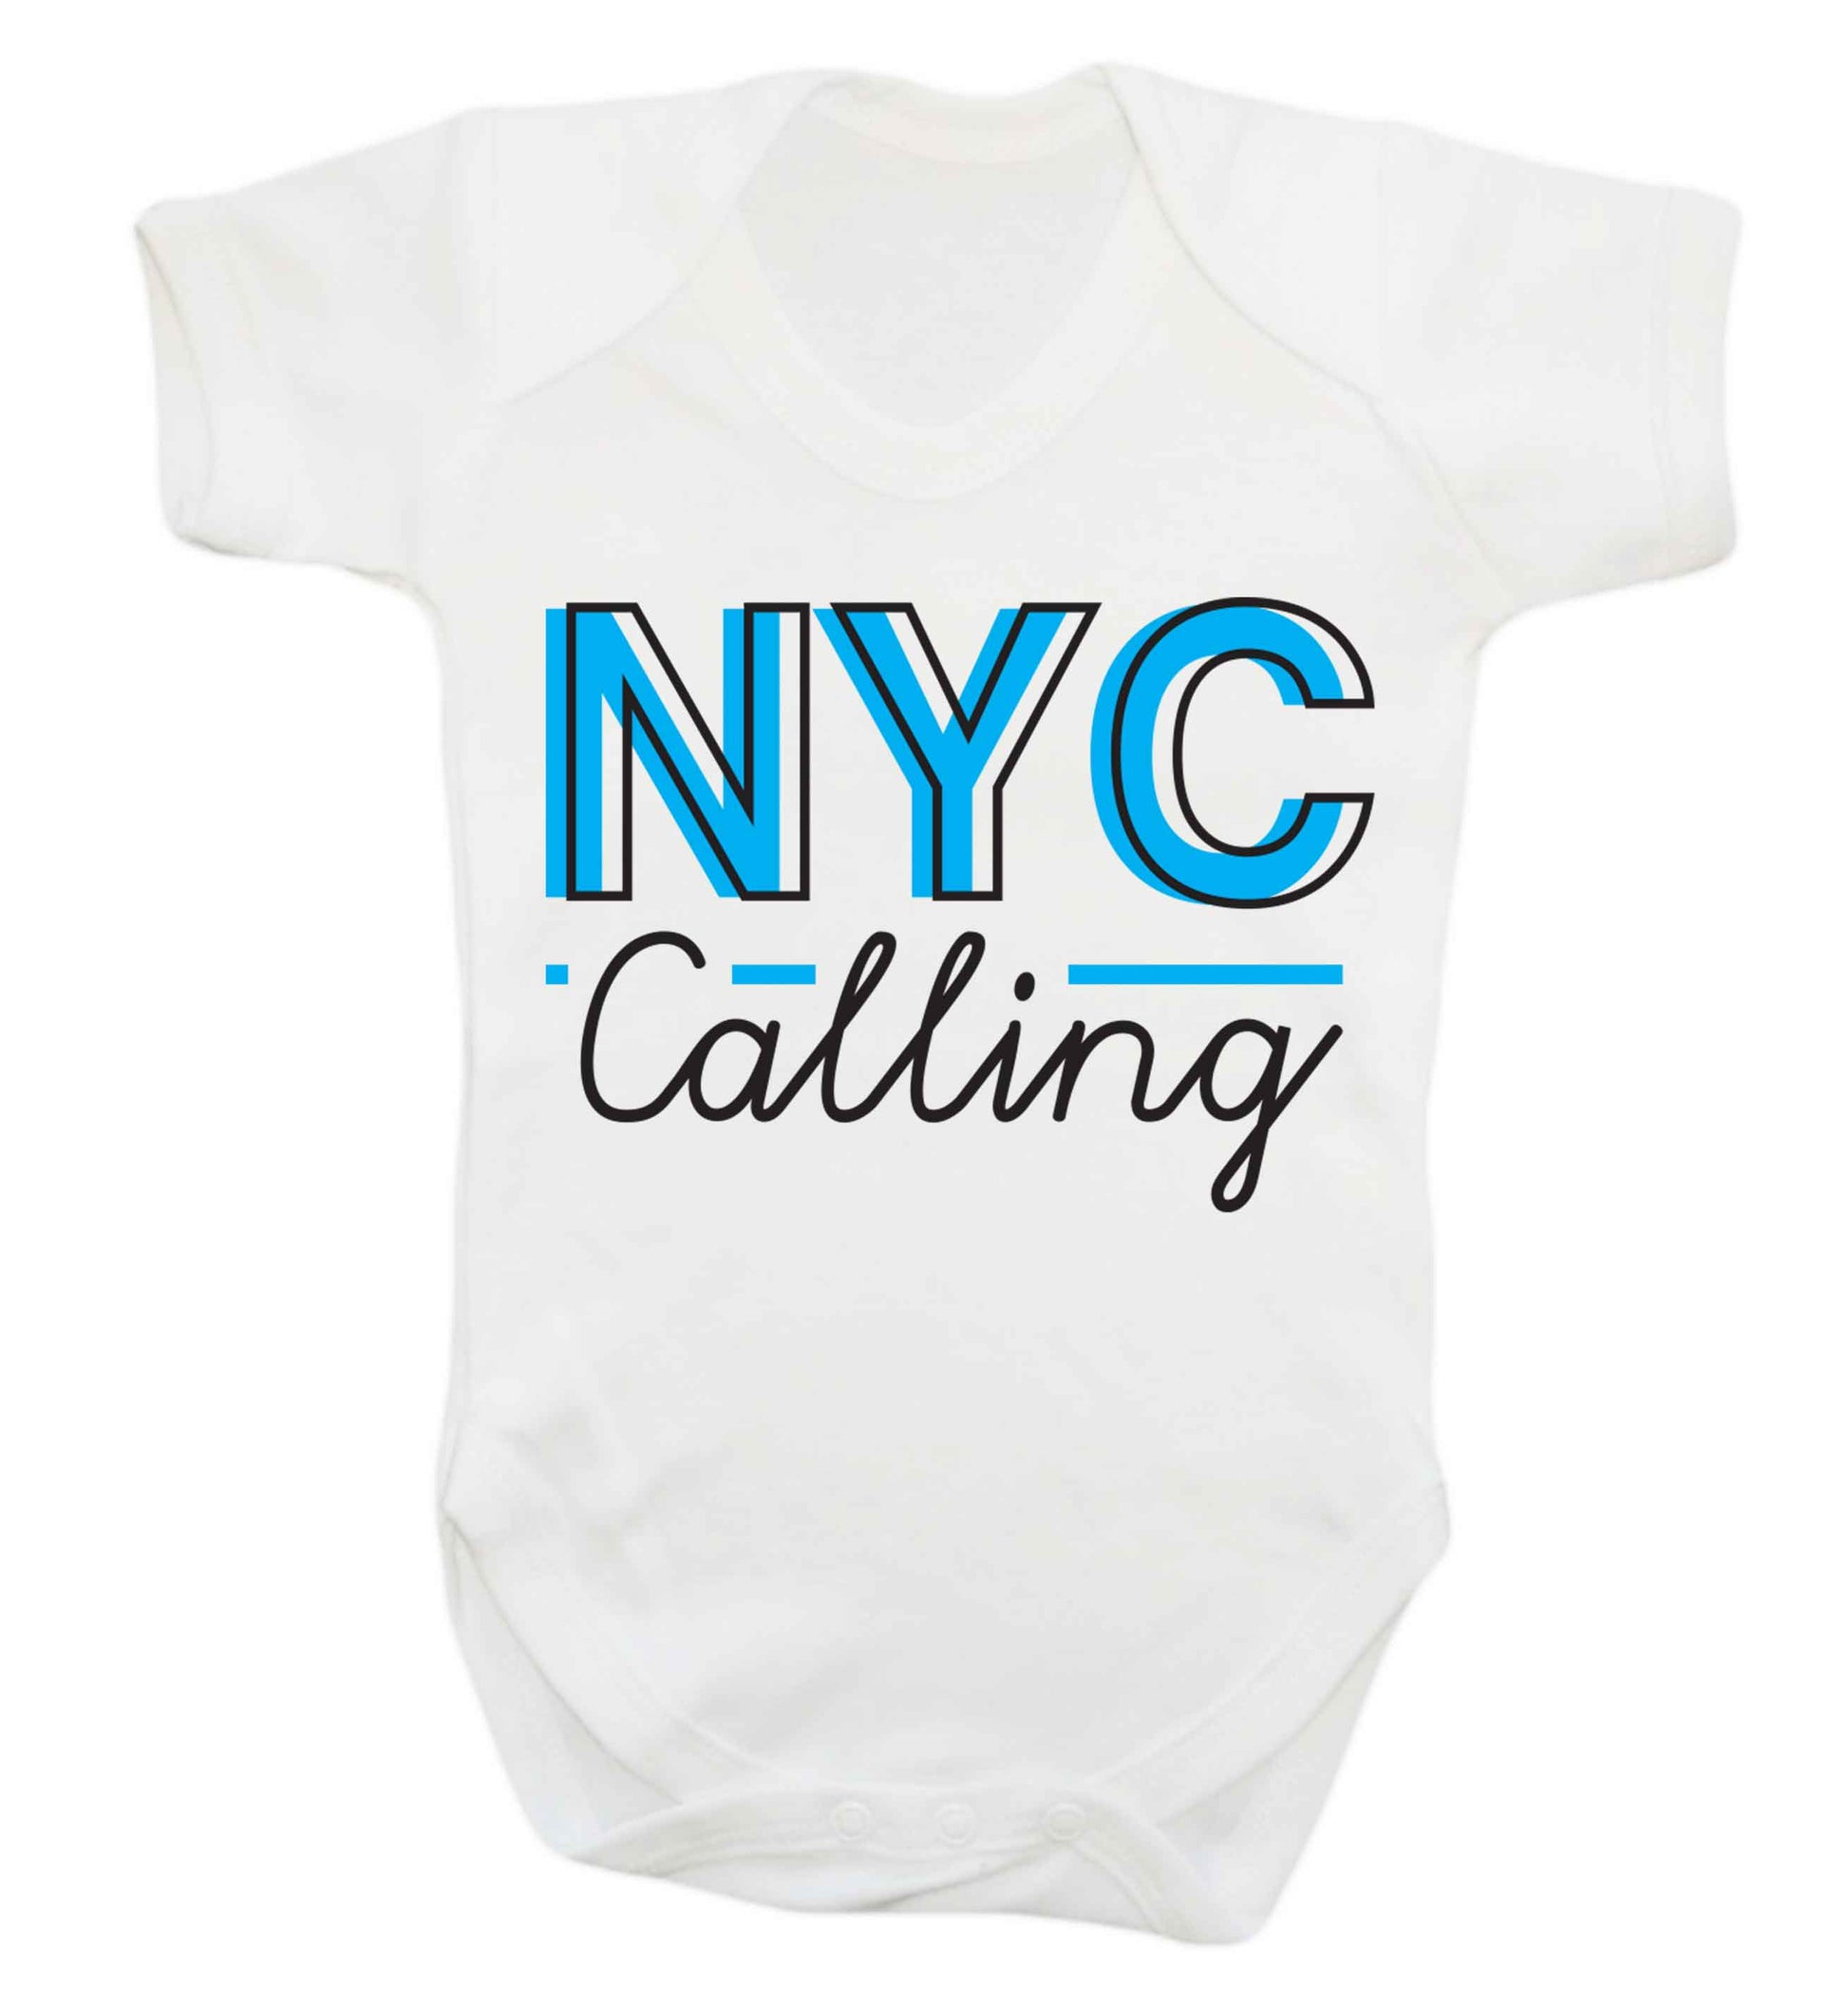 NYC calling Baby Vest white 18-24 months